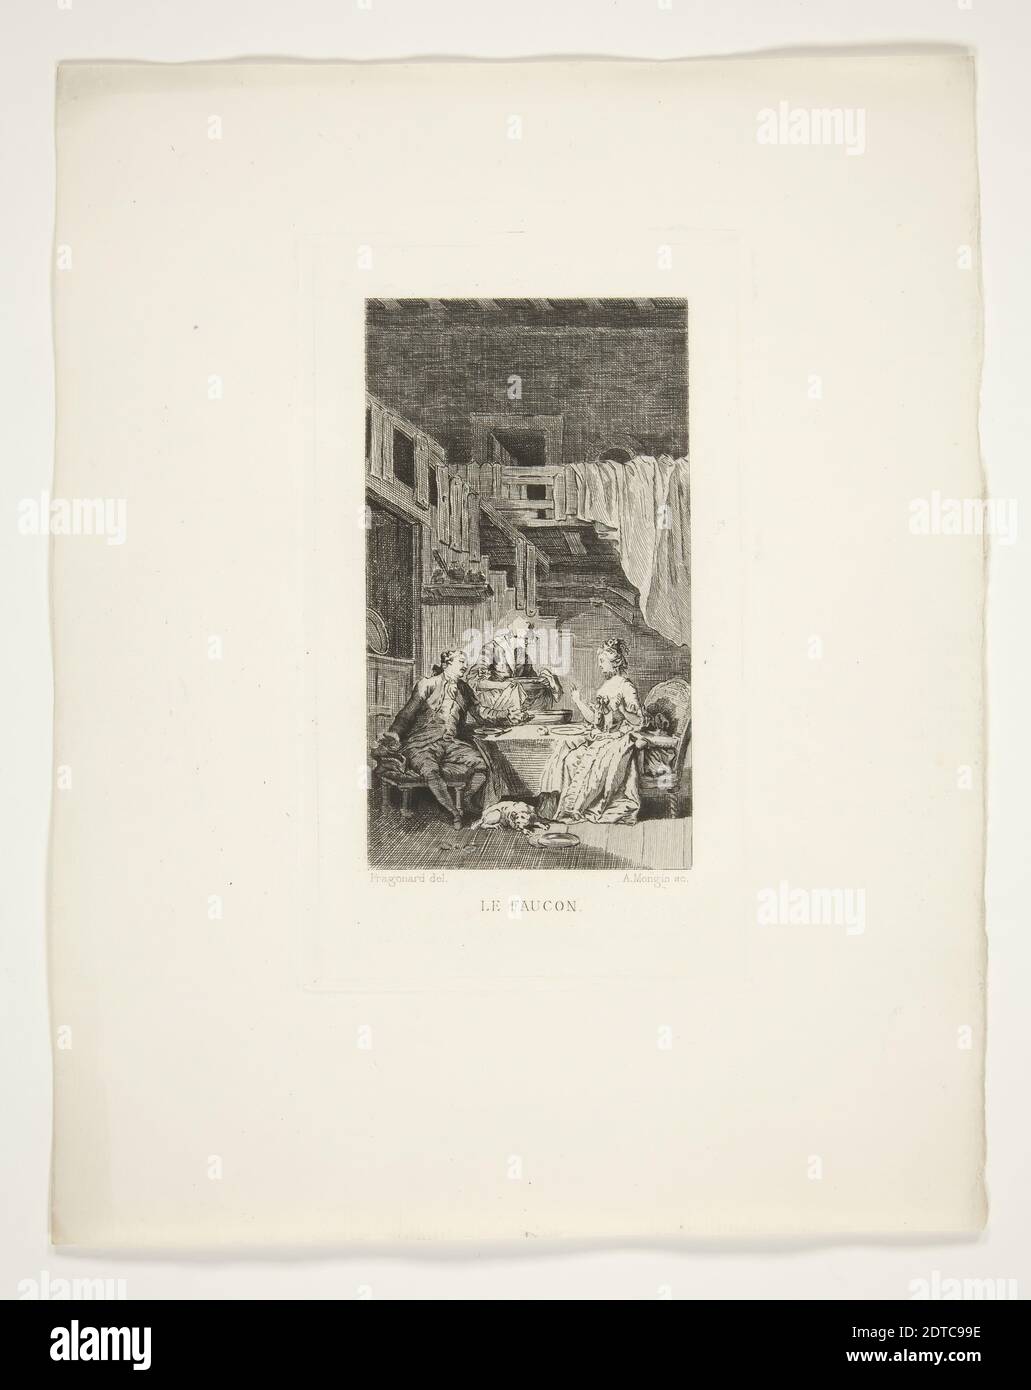 Etcher: Augustin Mongin, French, 1843–1911, After: Jean-Honoré Fragonard, French, 1732–1806, Le Faucon, Etching, platemark: 13.3 × 8 cm (5 1/4 × 3 1/8 in.), French, 19th century, Works on Paper - Prints Stock Photo